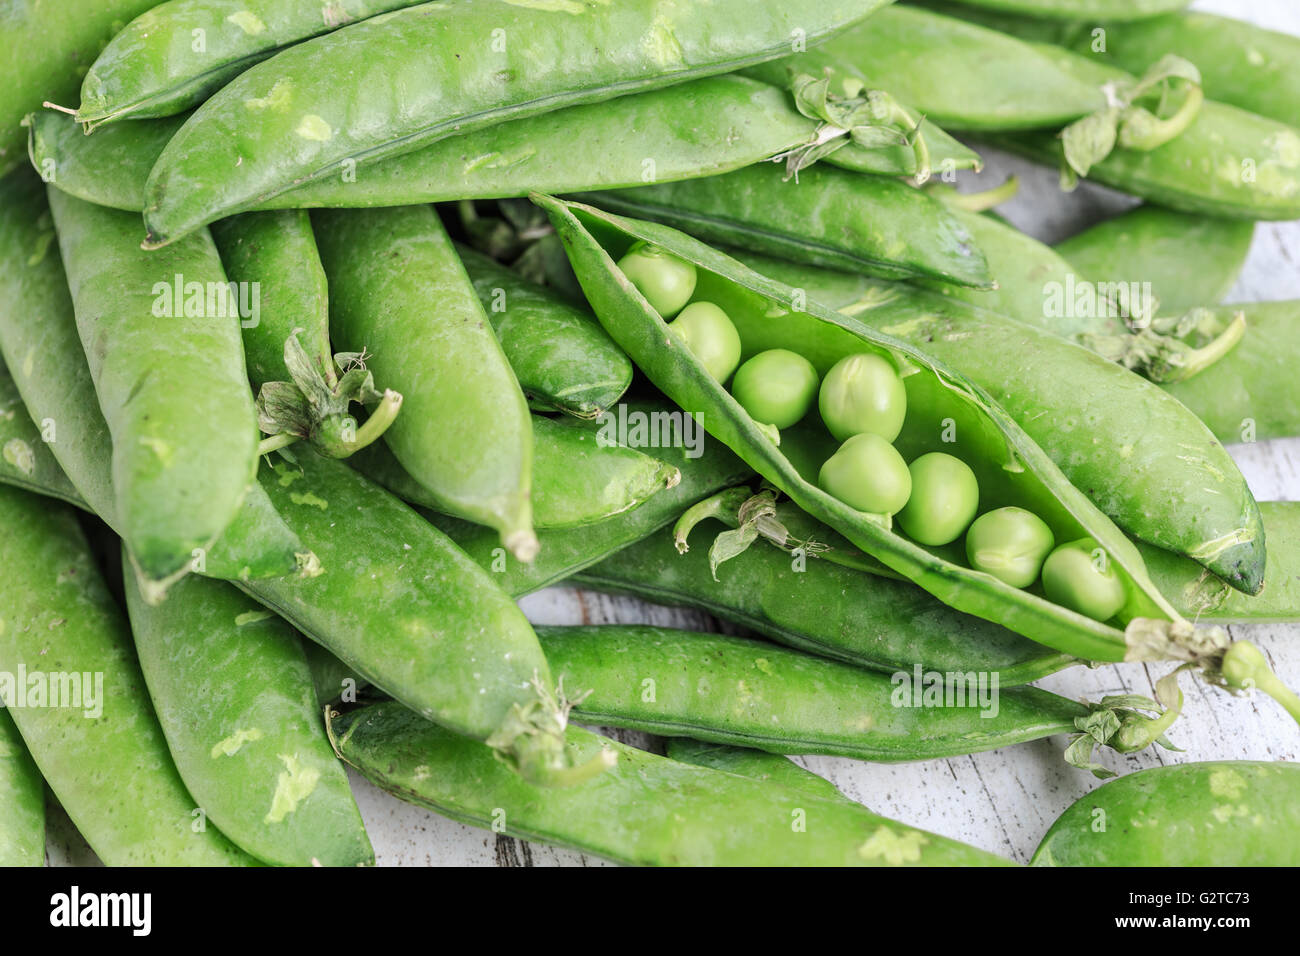 Green fresh peas pods on a wooden background Stock Photo